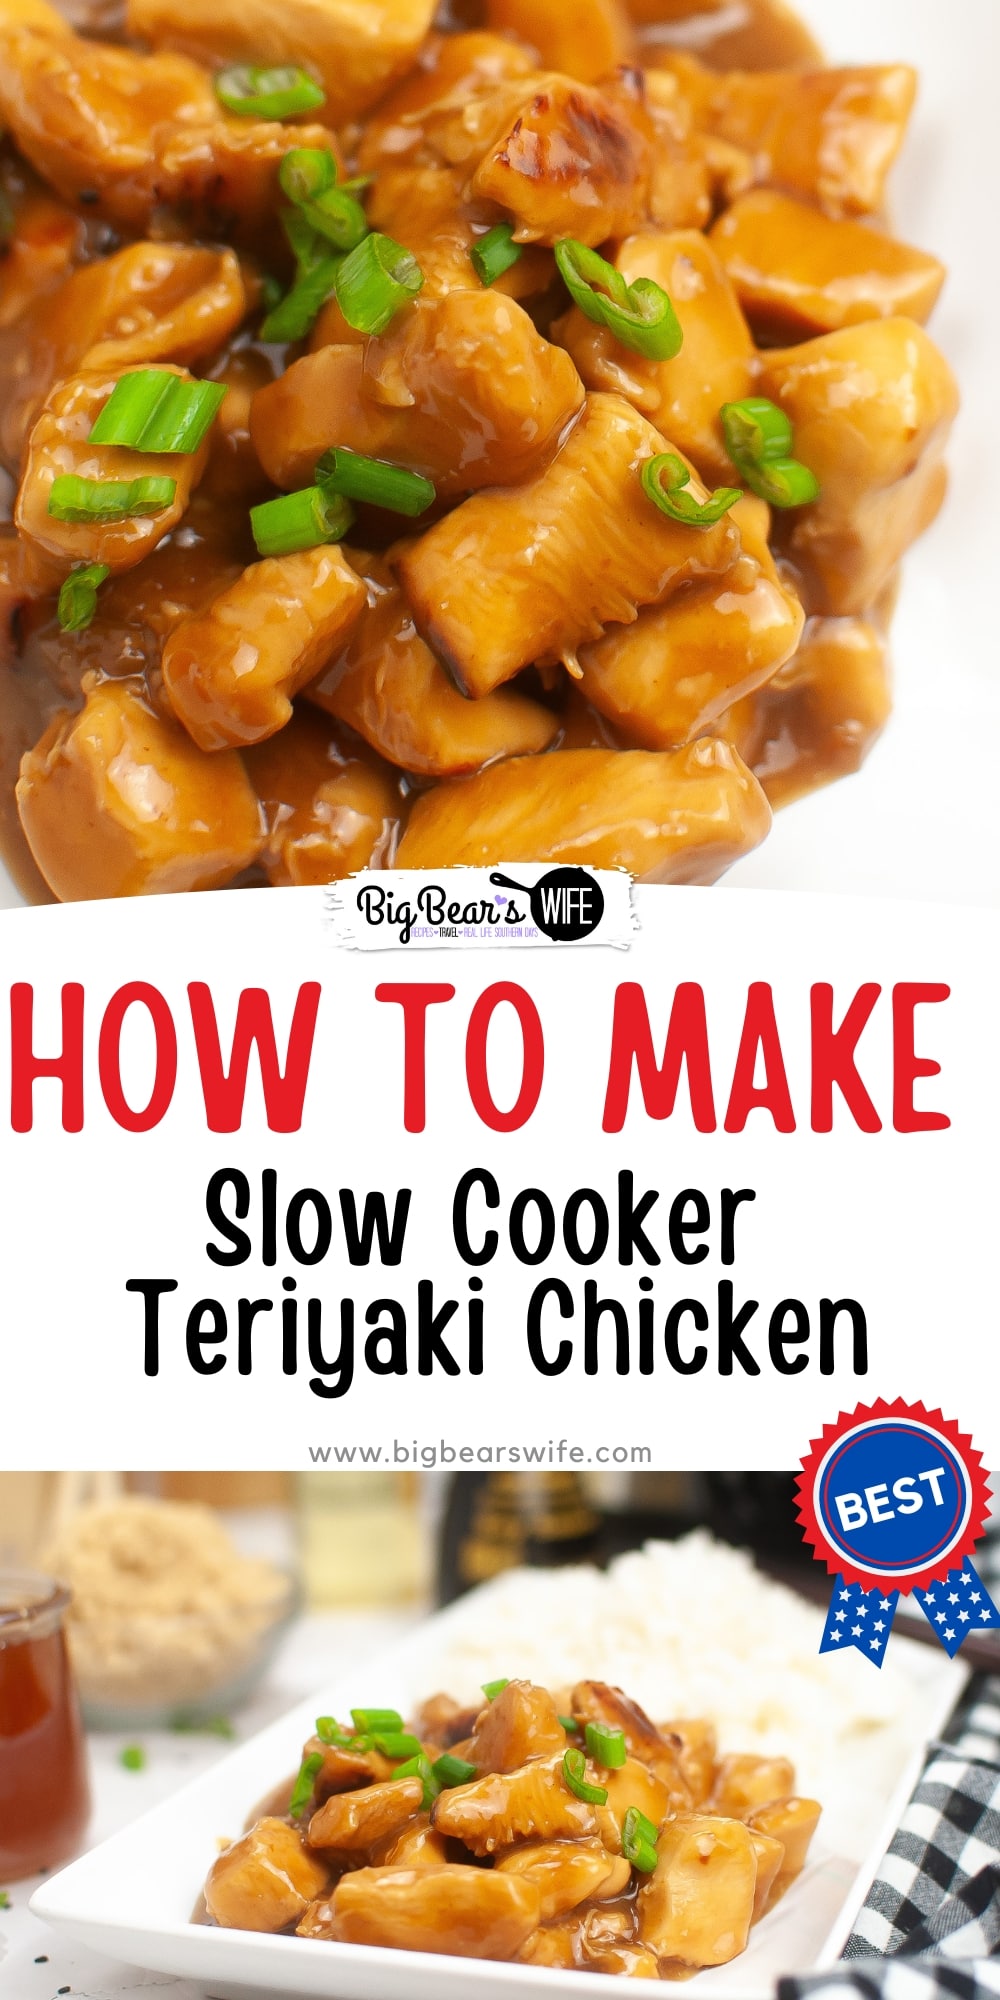 Looking to shake up your dinner routine? Change up your dinner rotation with this mouthwatering slow cooker teriyaki chicken recipe. With minimal effort and maximum flavor, this dish is a game-changer for busy weeknights. via @bigbearswife